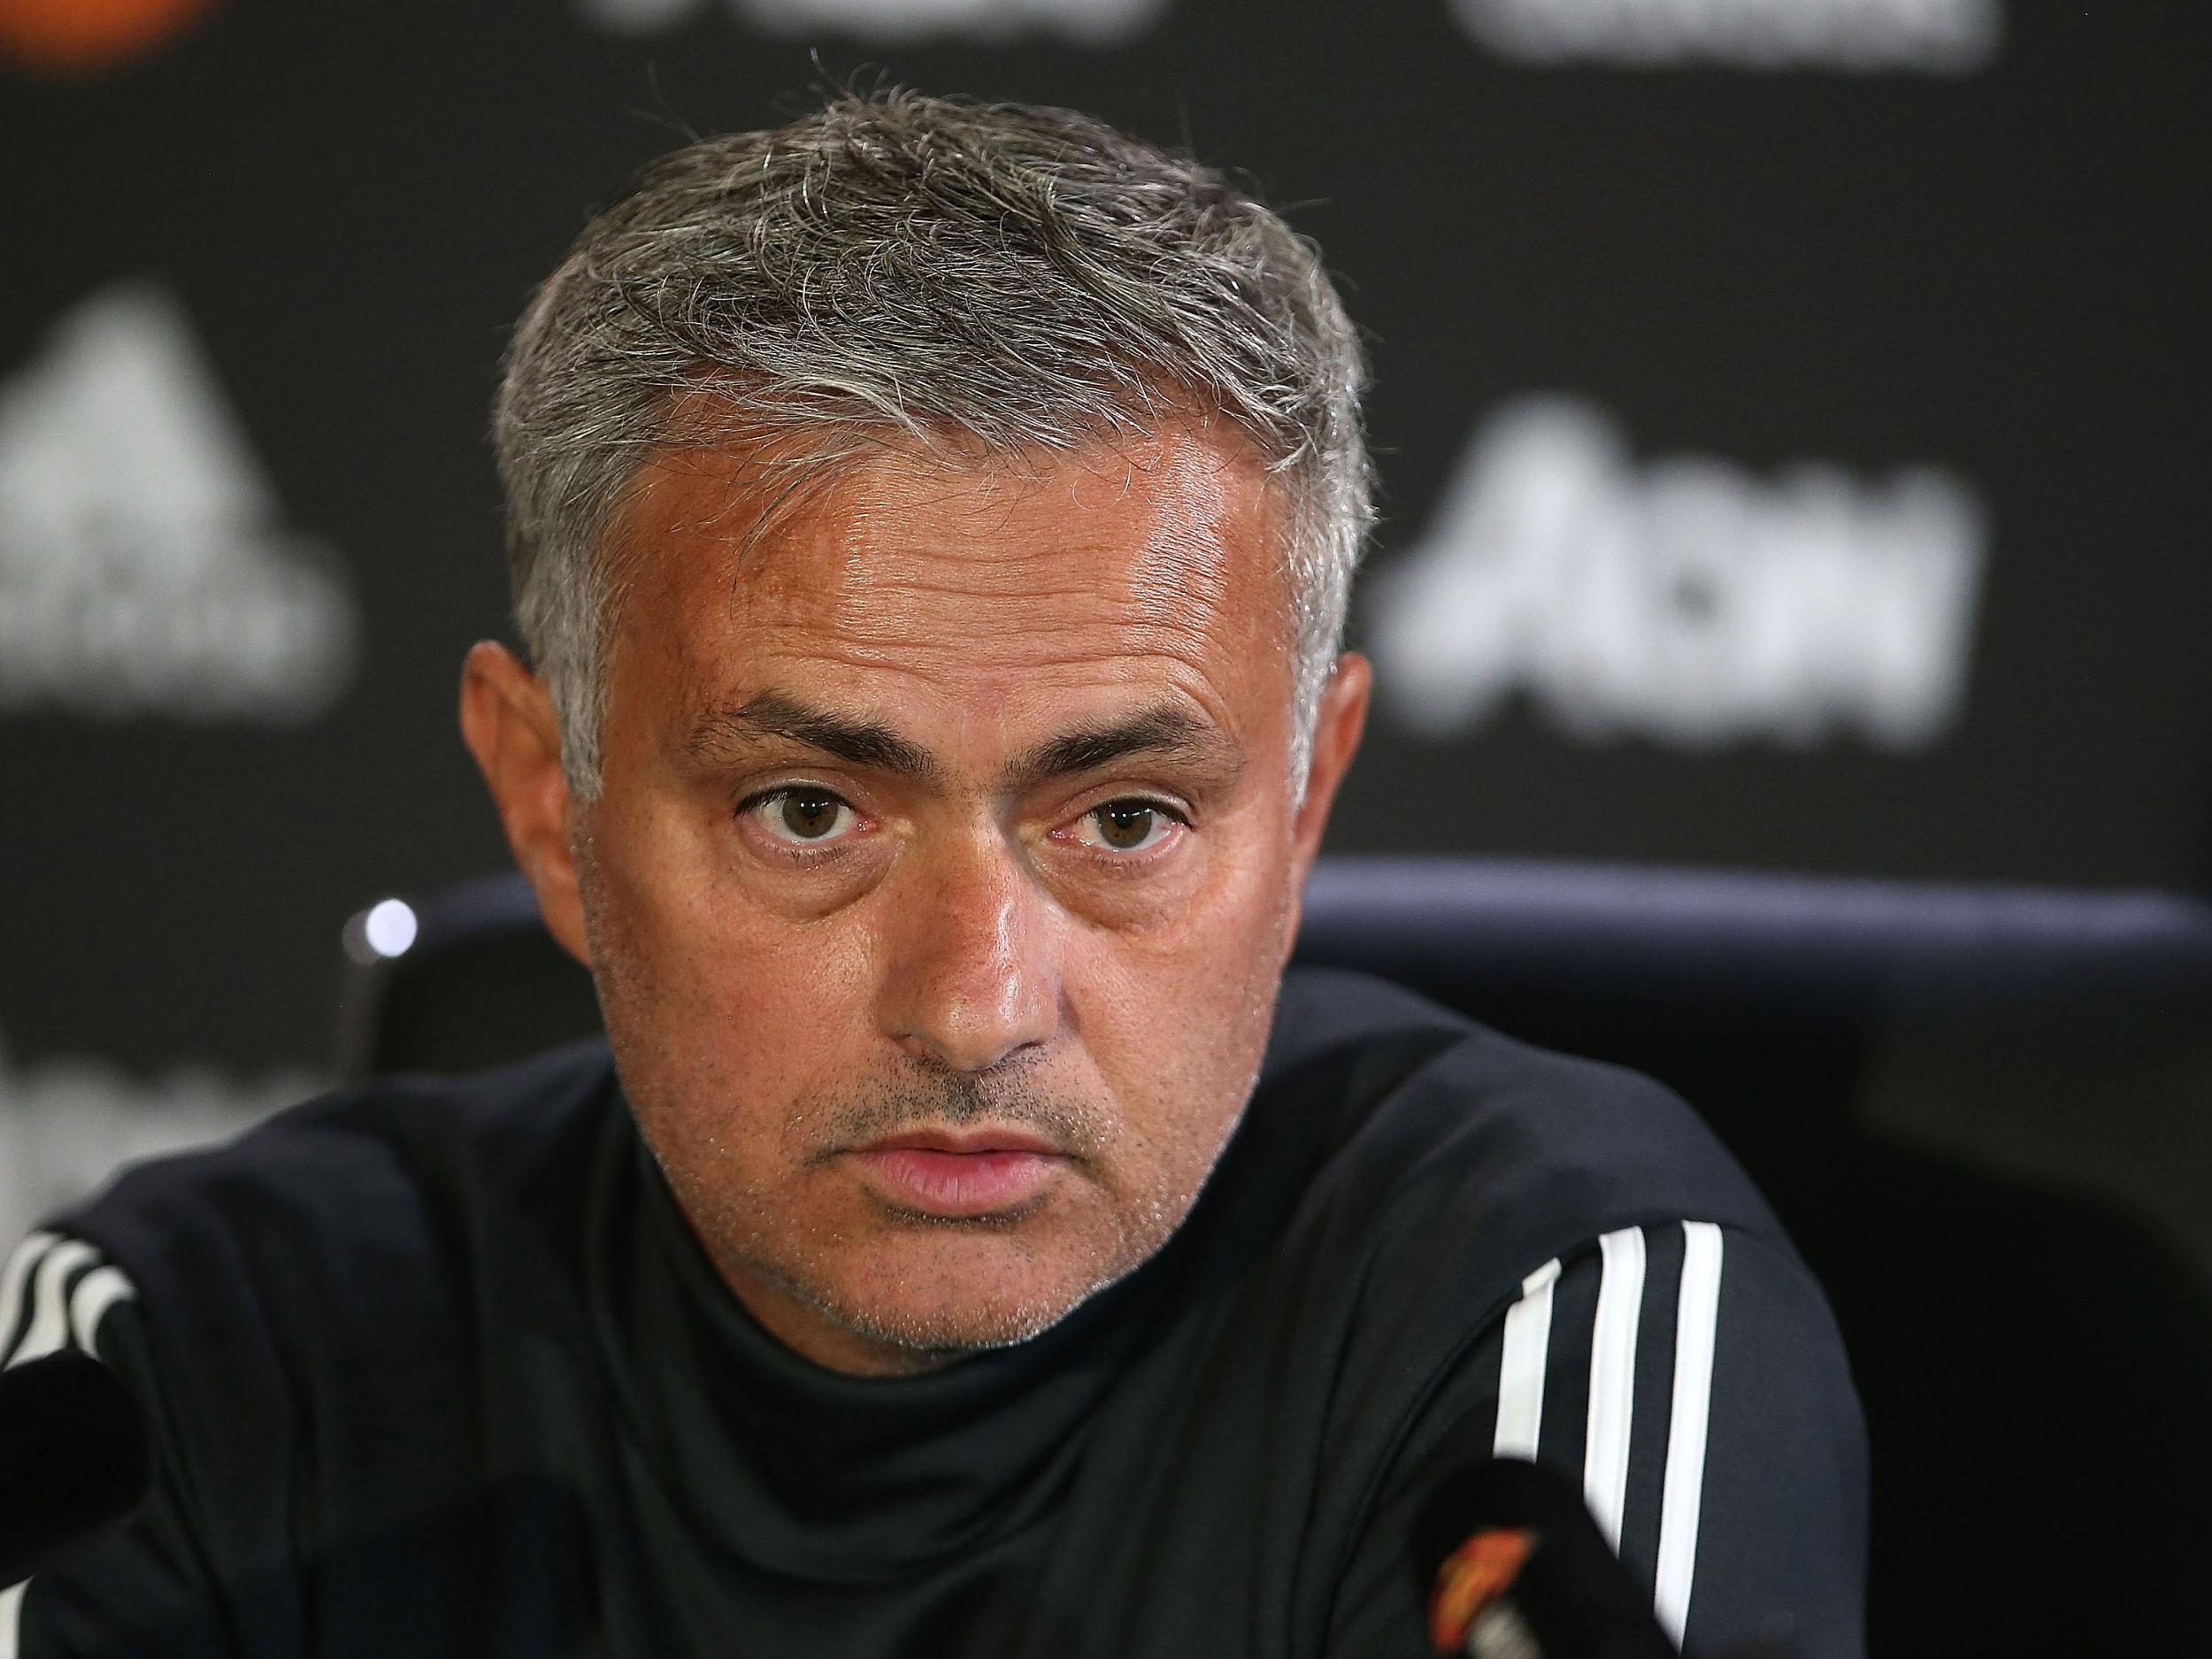 Jose Mourinho expects Manchester United's rivals to challenge, no matter what happens in the market